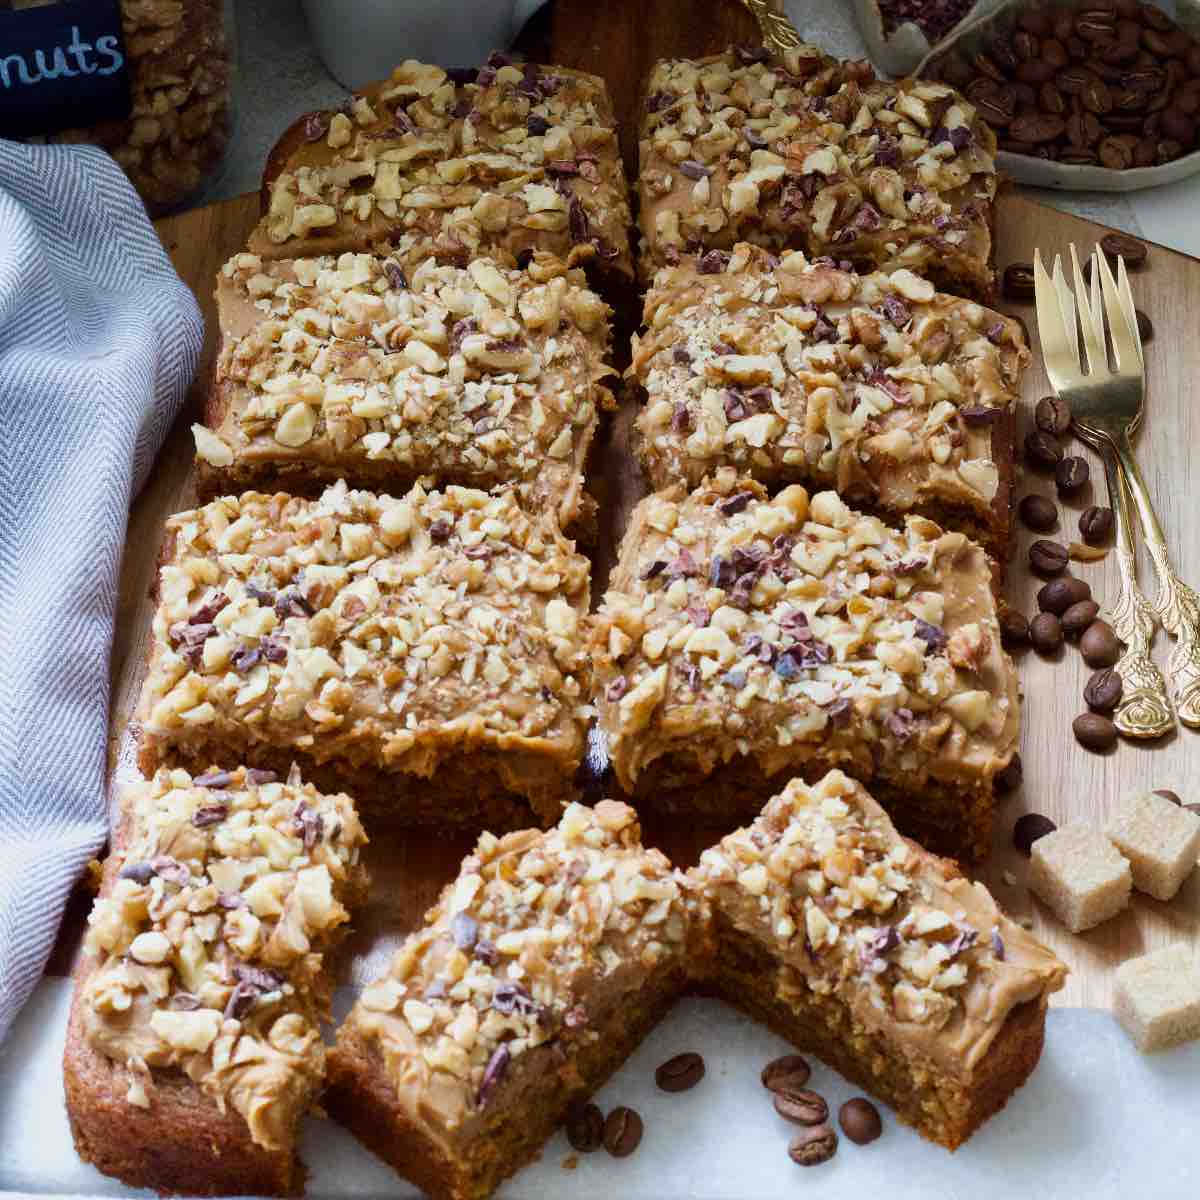 Slices of coffee and walnut cake arranged on a board, coffee beans, sugar cubes and forks.